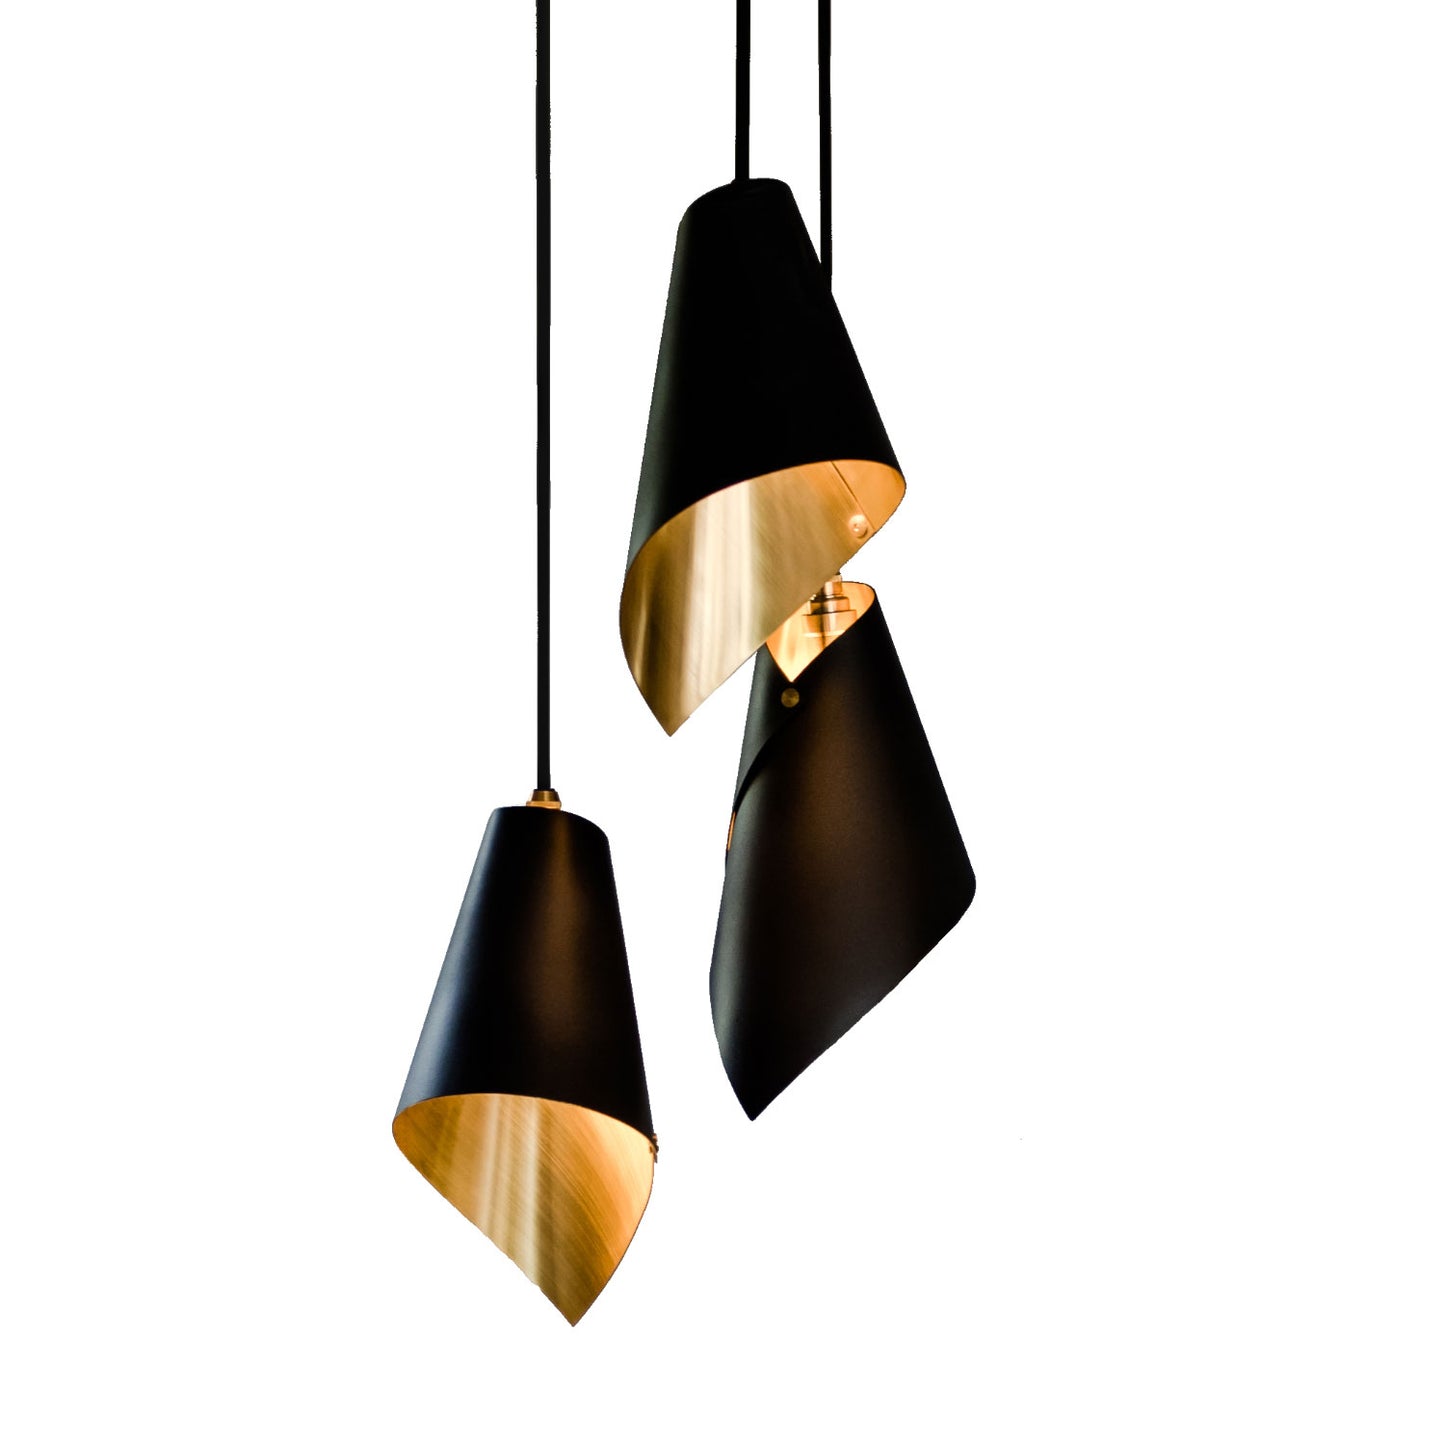 ARC 3 pendant lights in black and brushed brass supplied by South Charlotte Fine lighting